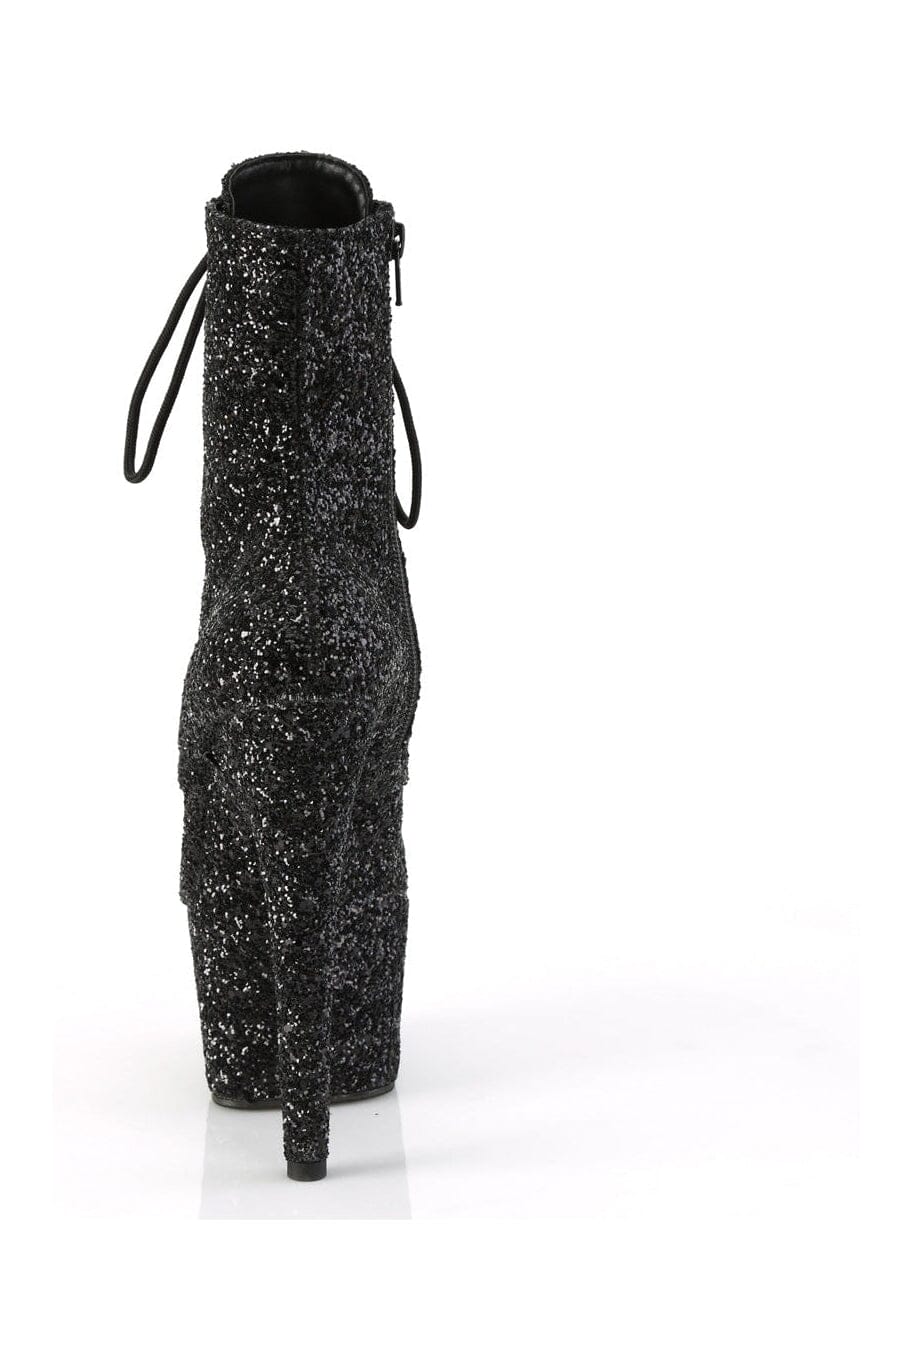 ADORE-1020GWR Black Glitter Ankle Boot-Ankle Boots-Pleaser-SEXYSHOES.COM